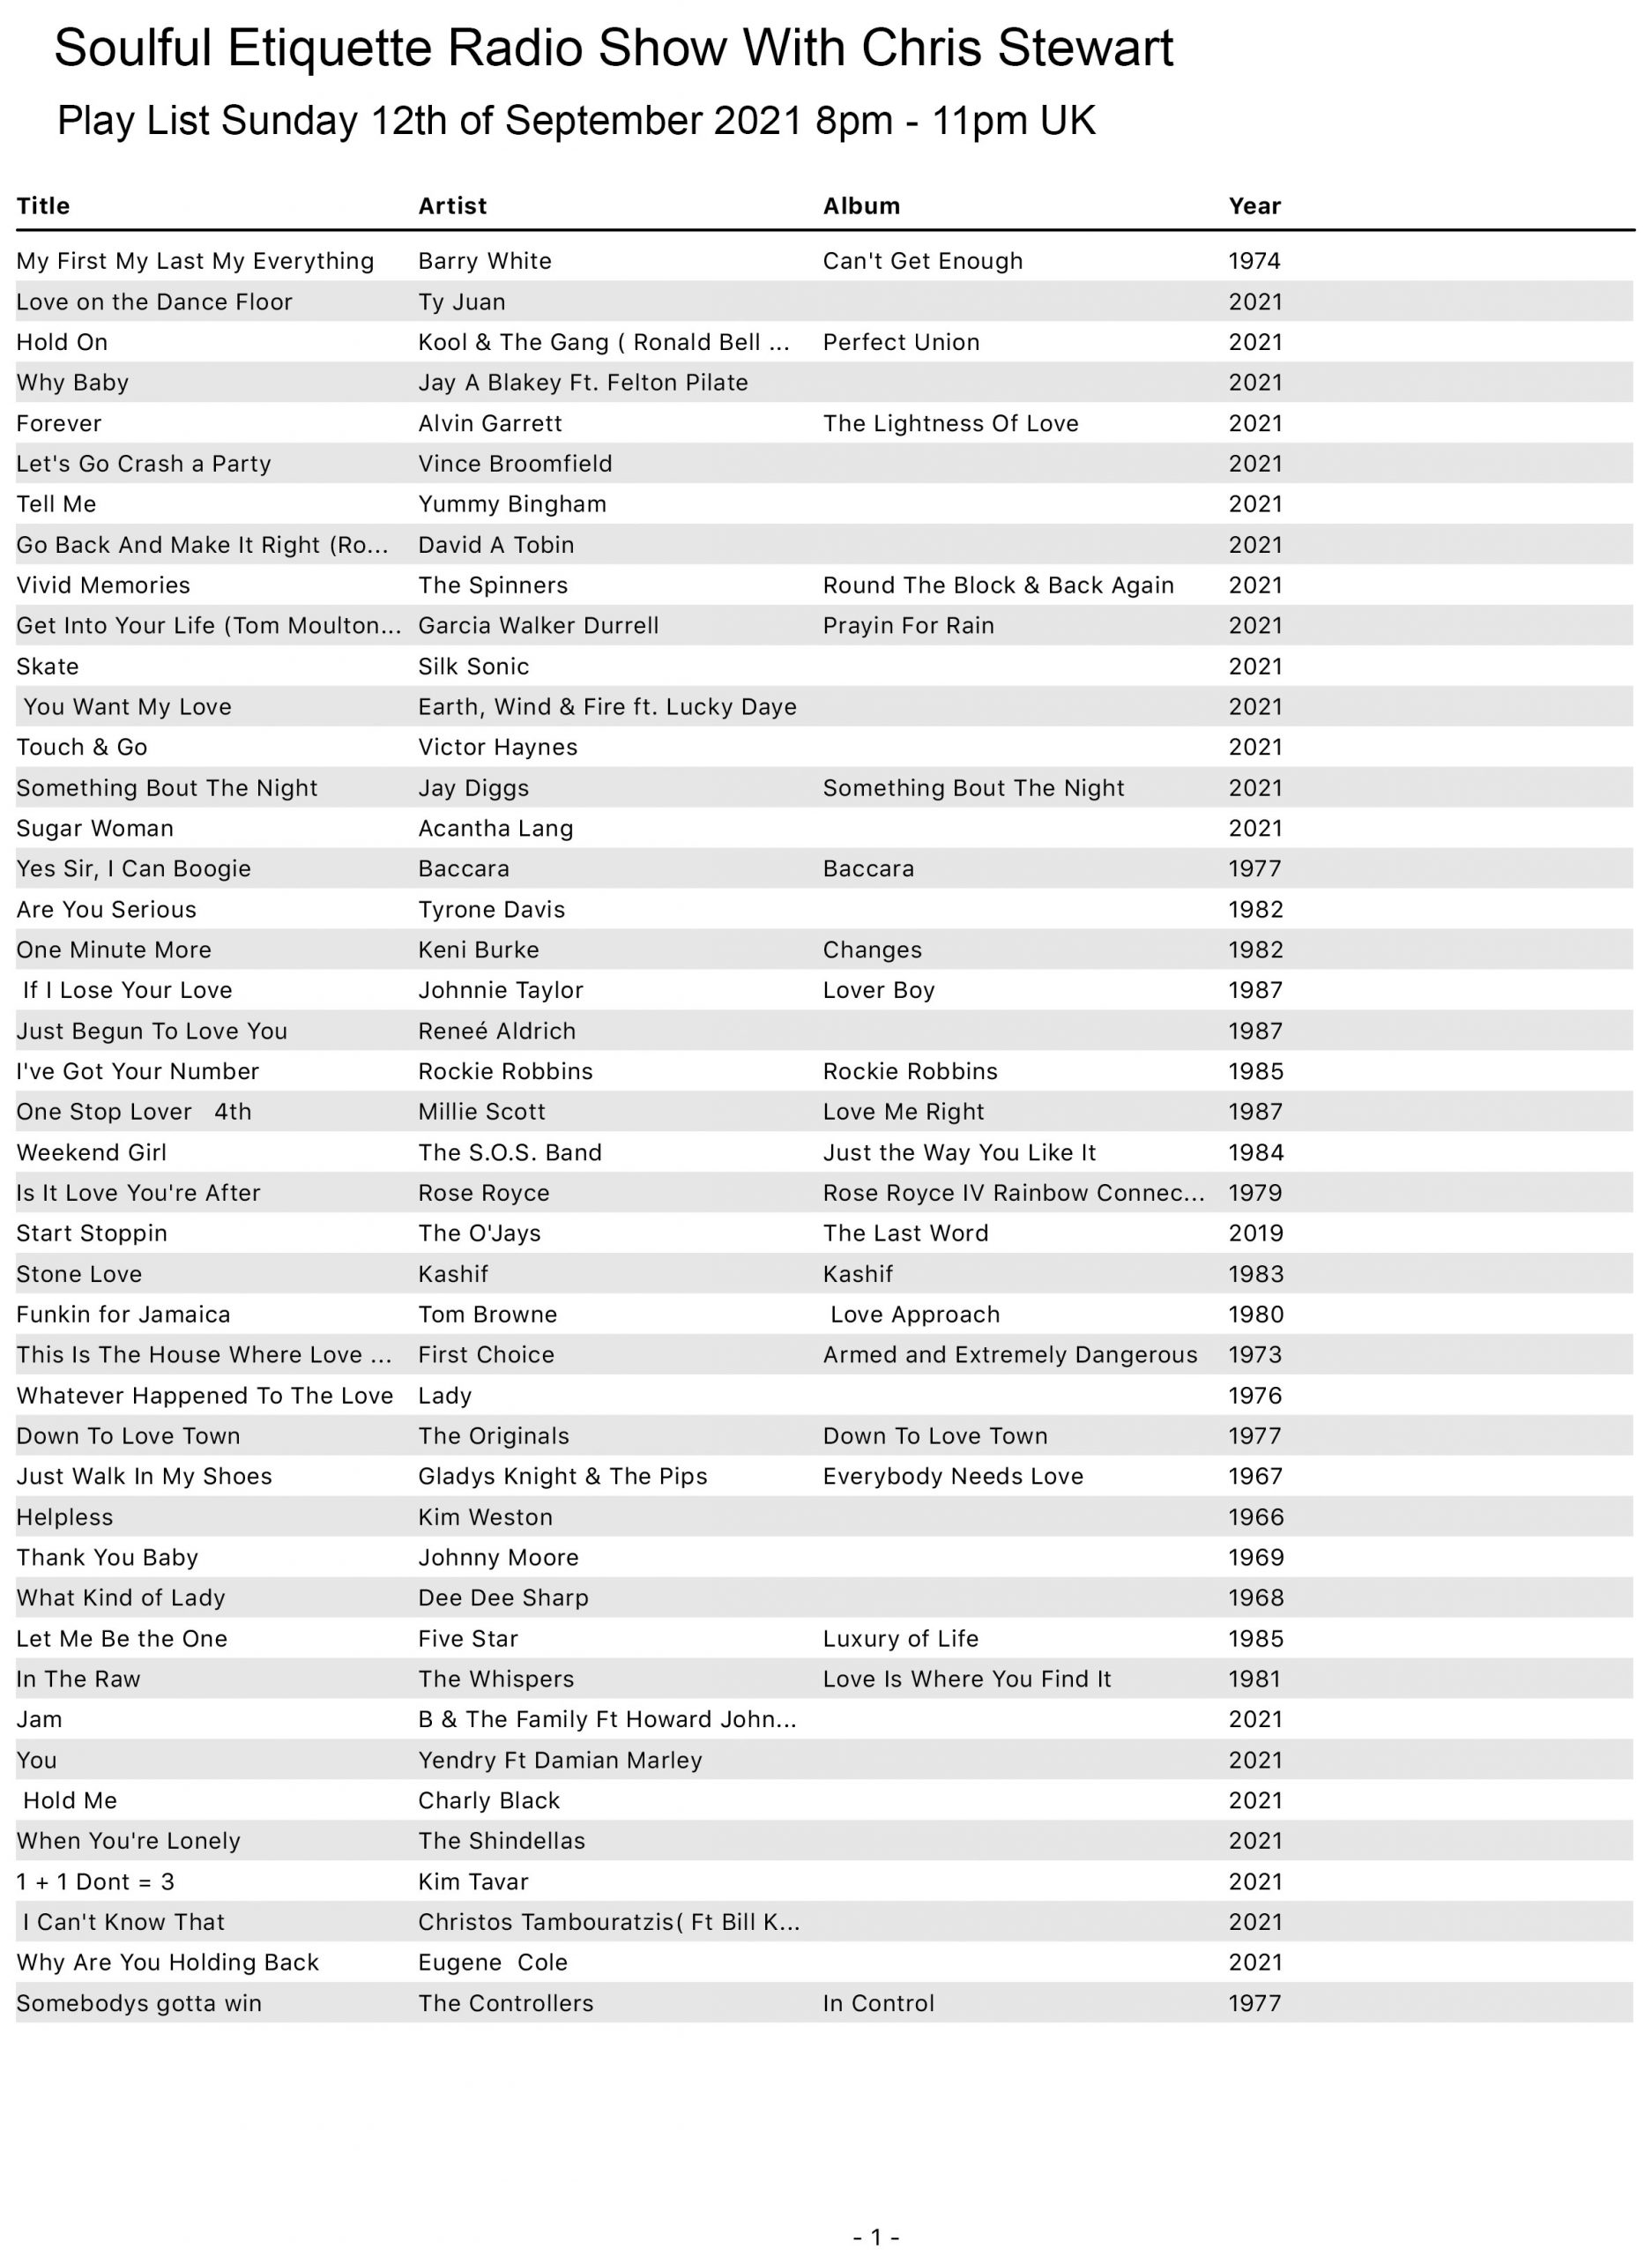 Play List For the Soulful Etiquette Soul Radio Show 12th of September 2021